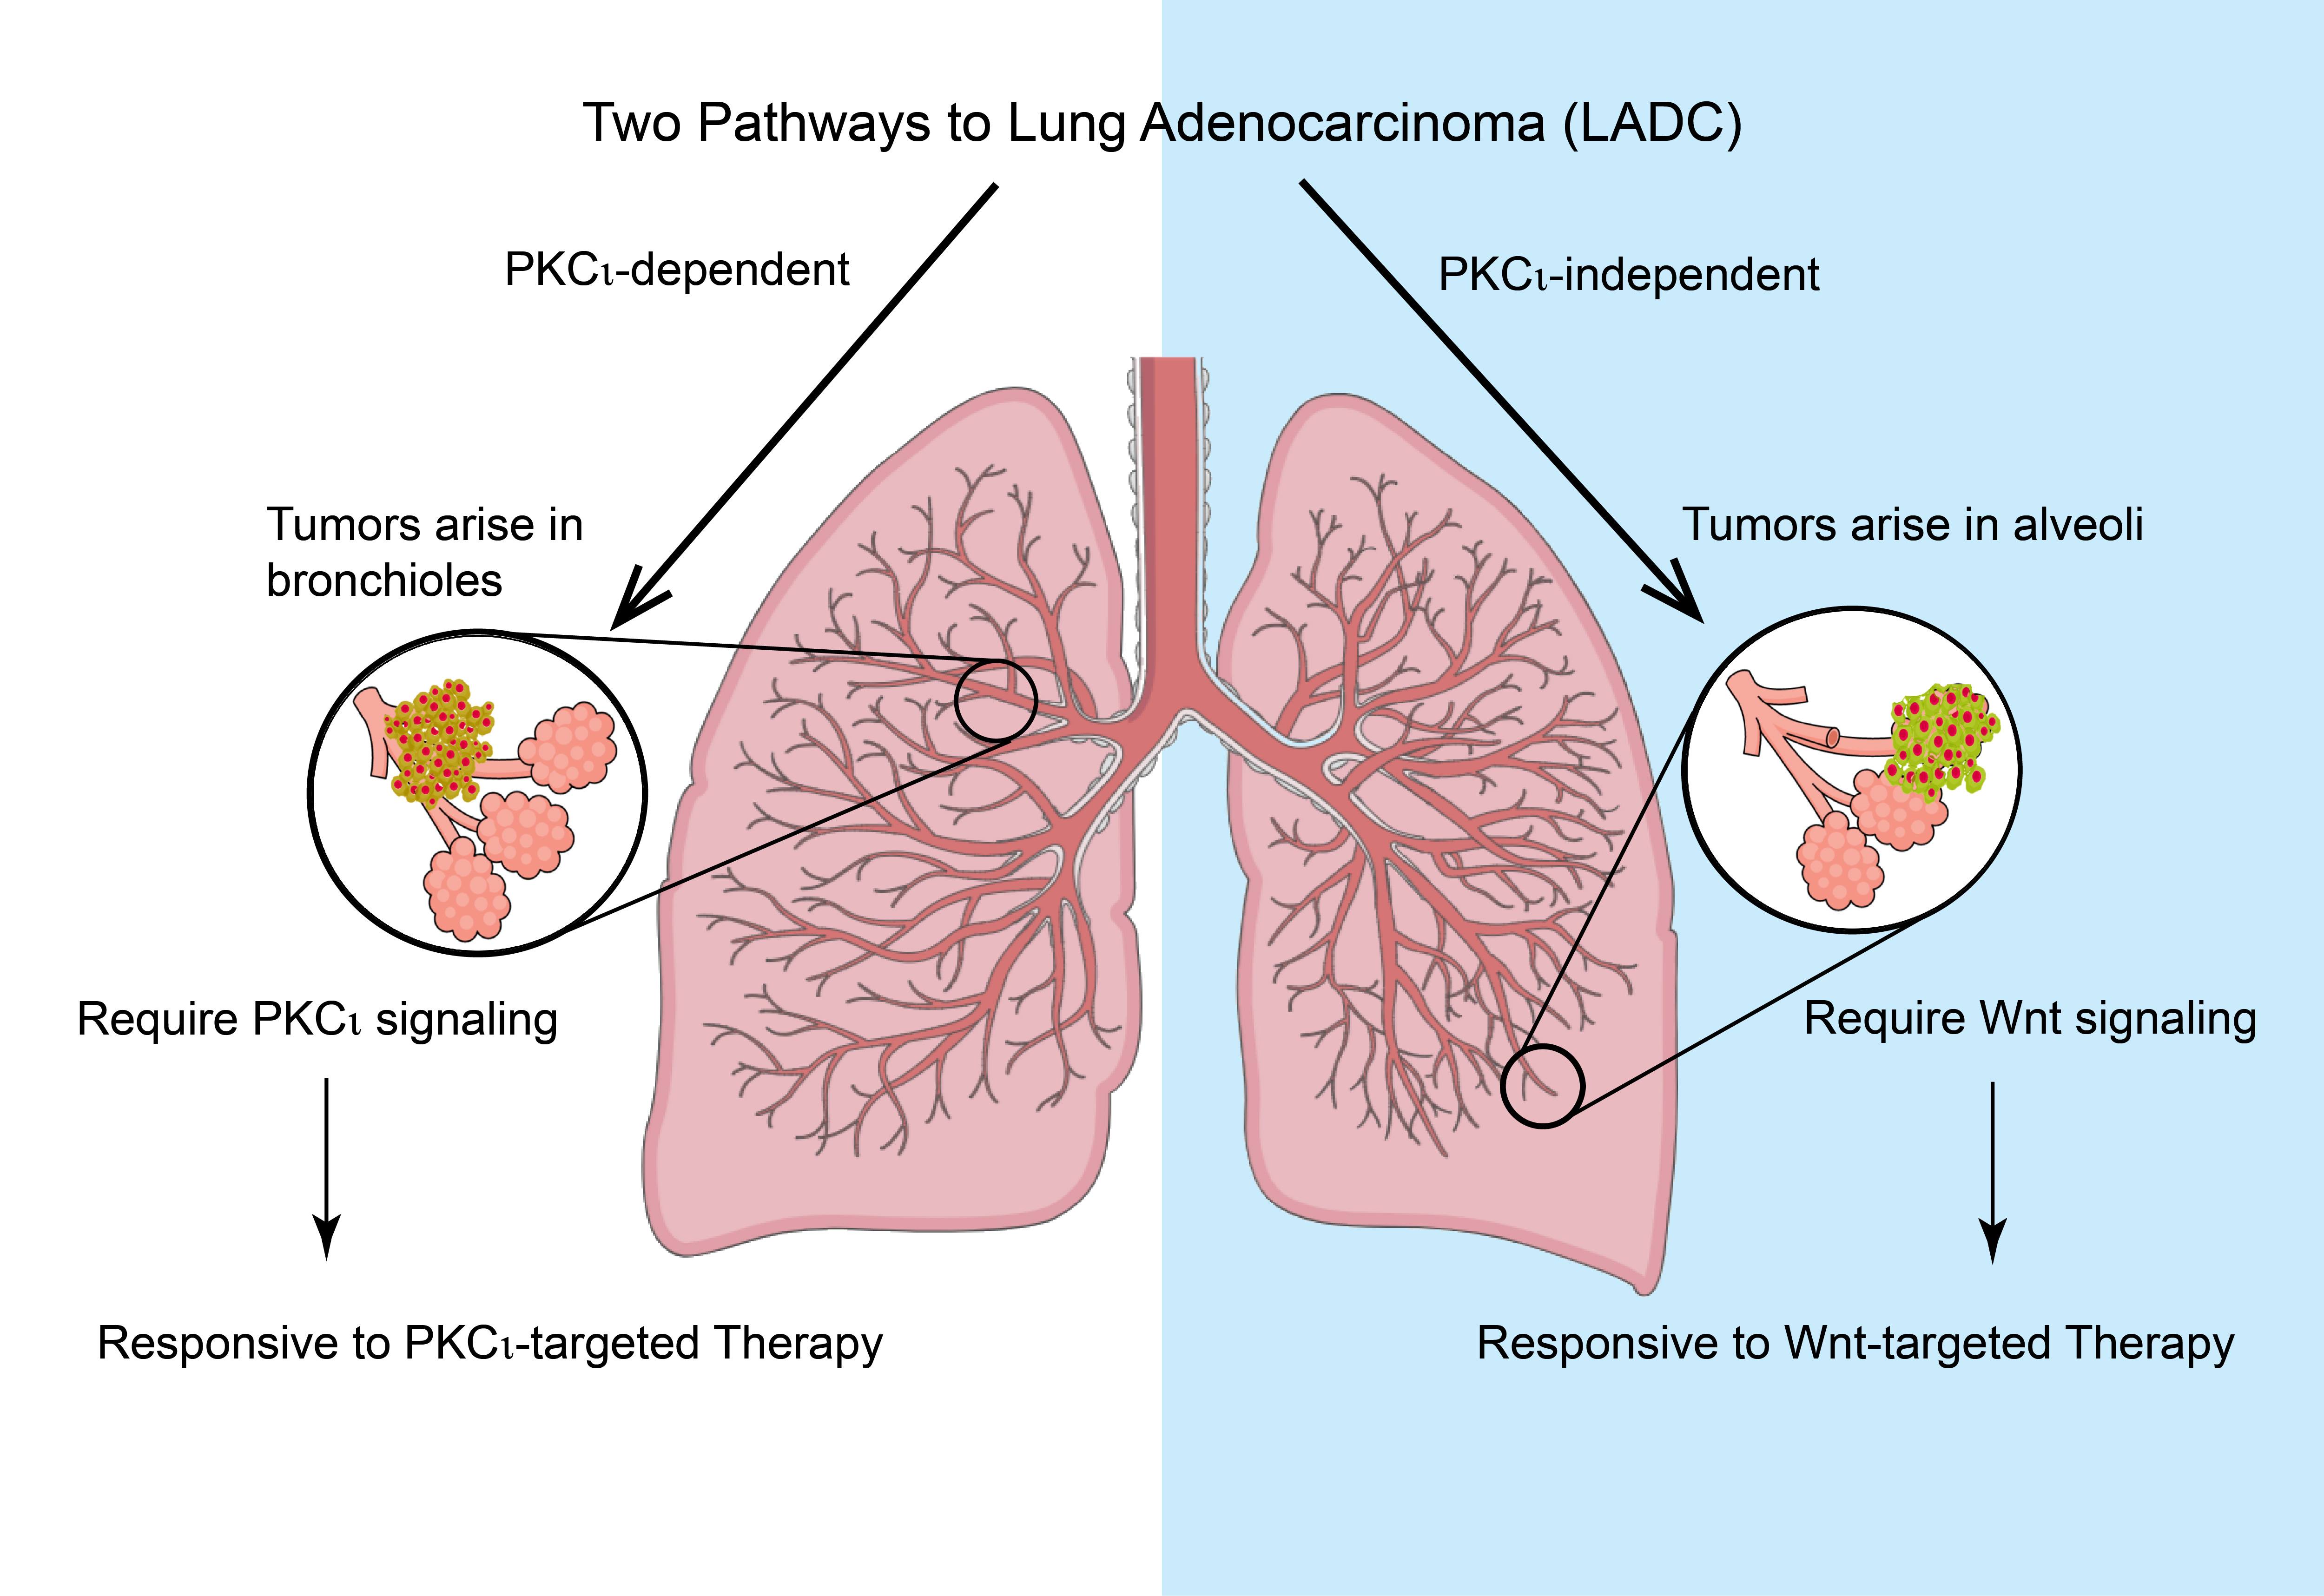 diagram of two pathways to lung adenocarcinoma